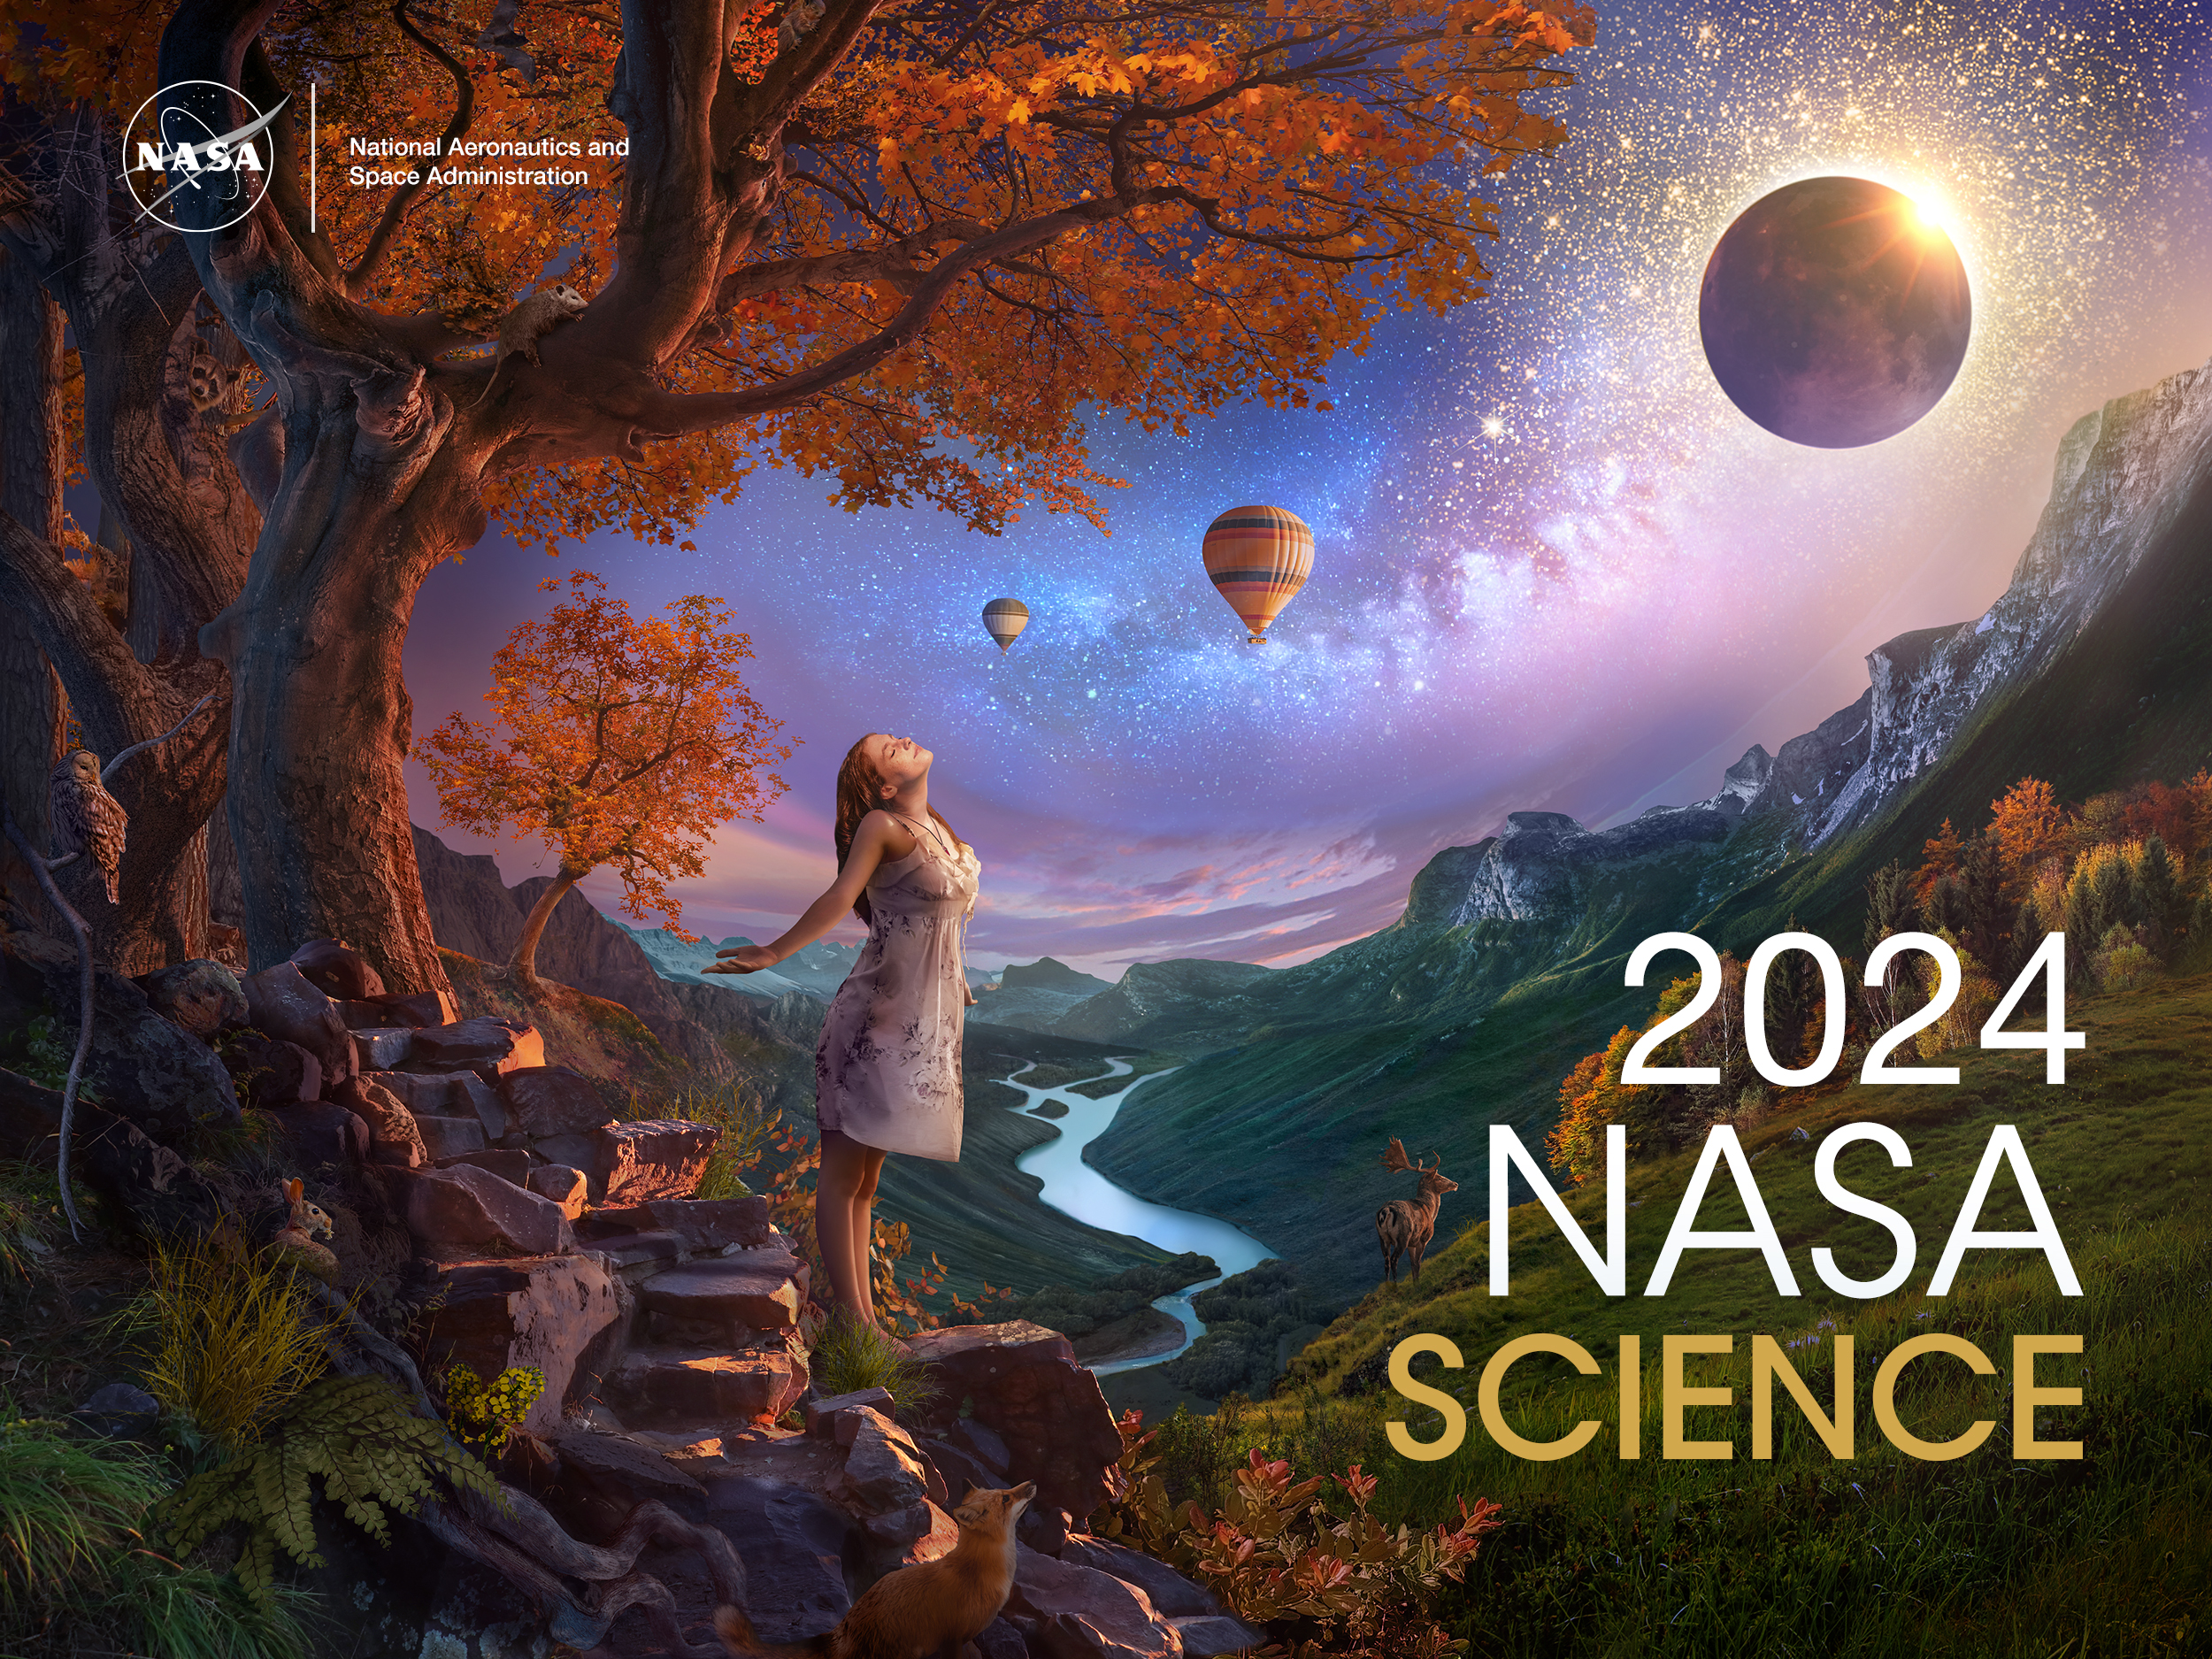 An artist’s concept of a landscape, composed of dusky purples, oranges, golds, and greens. In the left foreground, a young woman wearing a white dress basks in the rays of a solar eclipse. She stands under a bright orange fall tree rooted to the side of a rocky mountain trail. The scene overlooks a valley with a river running through the middle towards distant hazy blue mountains. Nocturnal animals – including a fox, owl, possum, and bat – emerge to investigate the sudden onset of night. A deer stands on a grassy knoll at right in front of a line of fall colored trees. The Milky Way trails across the sky, leading up from the young woman to the eclipse and glittering stars at top right. Two hot air balloons float in the distance. This concept was created in celebration of the Heliophysics Big Year, which is bookended by the Annular Eclipse in October of 2023 and the Total Solar Eclipse in April of 2024.